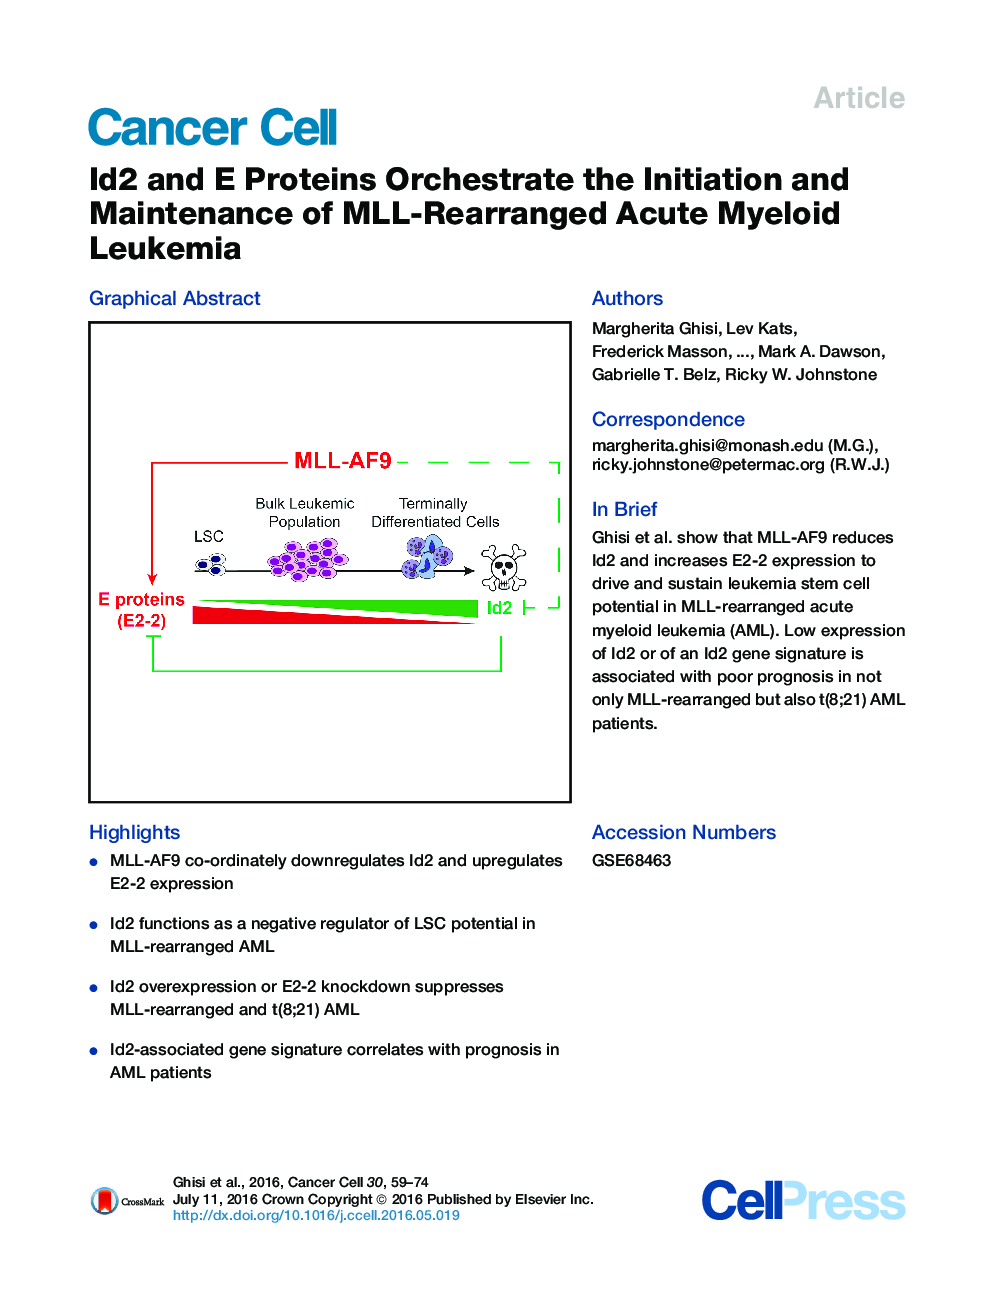 Id2 and E Proteins Orchestrate the Initiation and Maintenance of MLL-Rearranged Acute Myeloid Leukemia